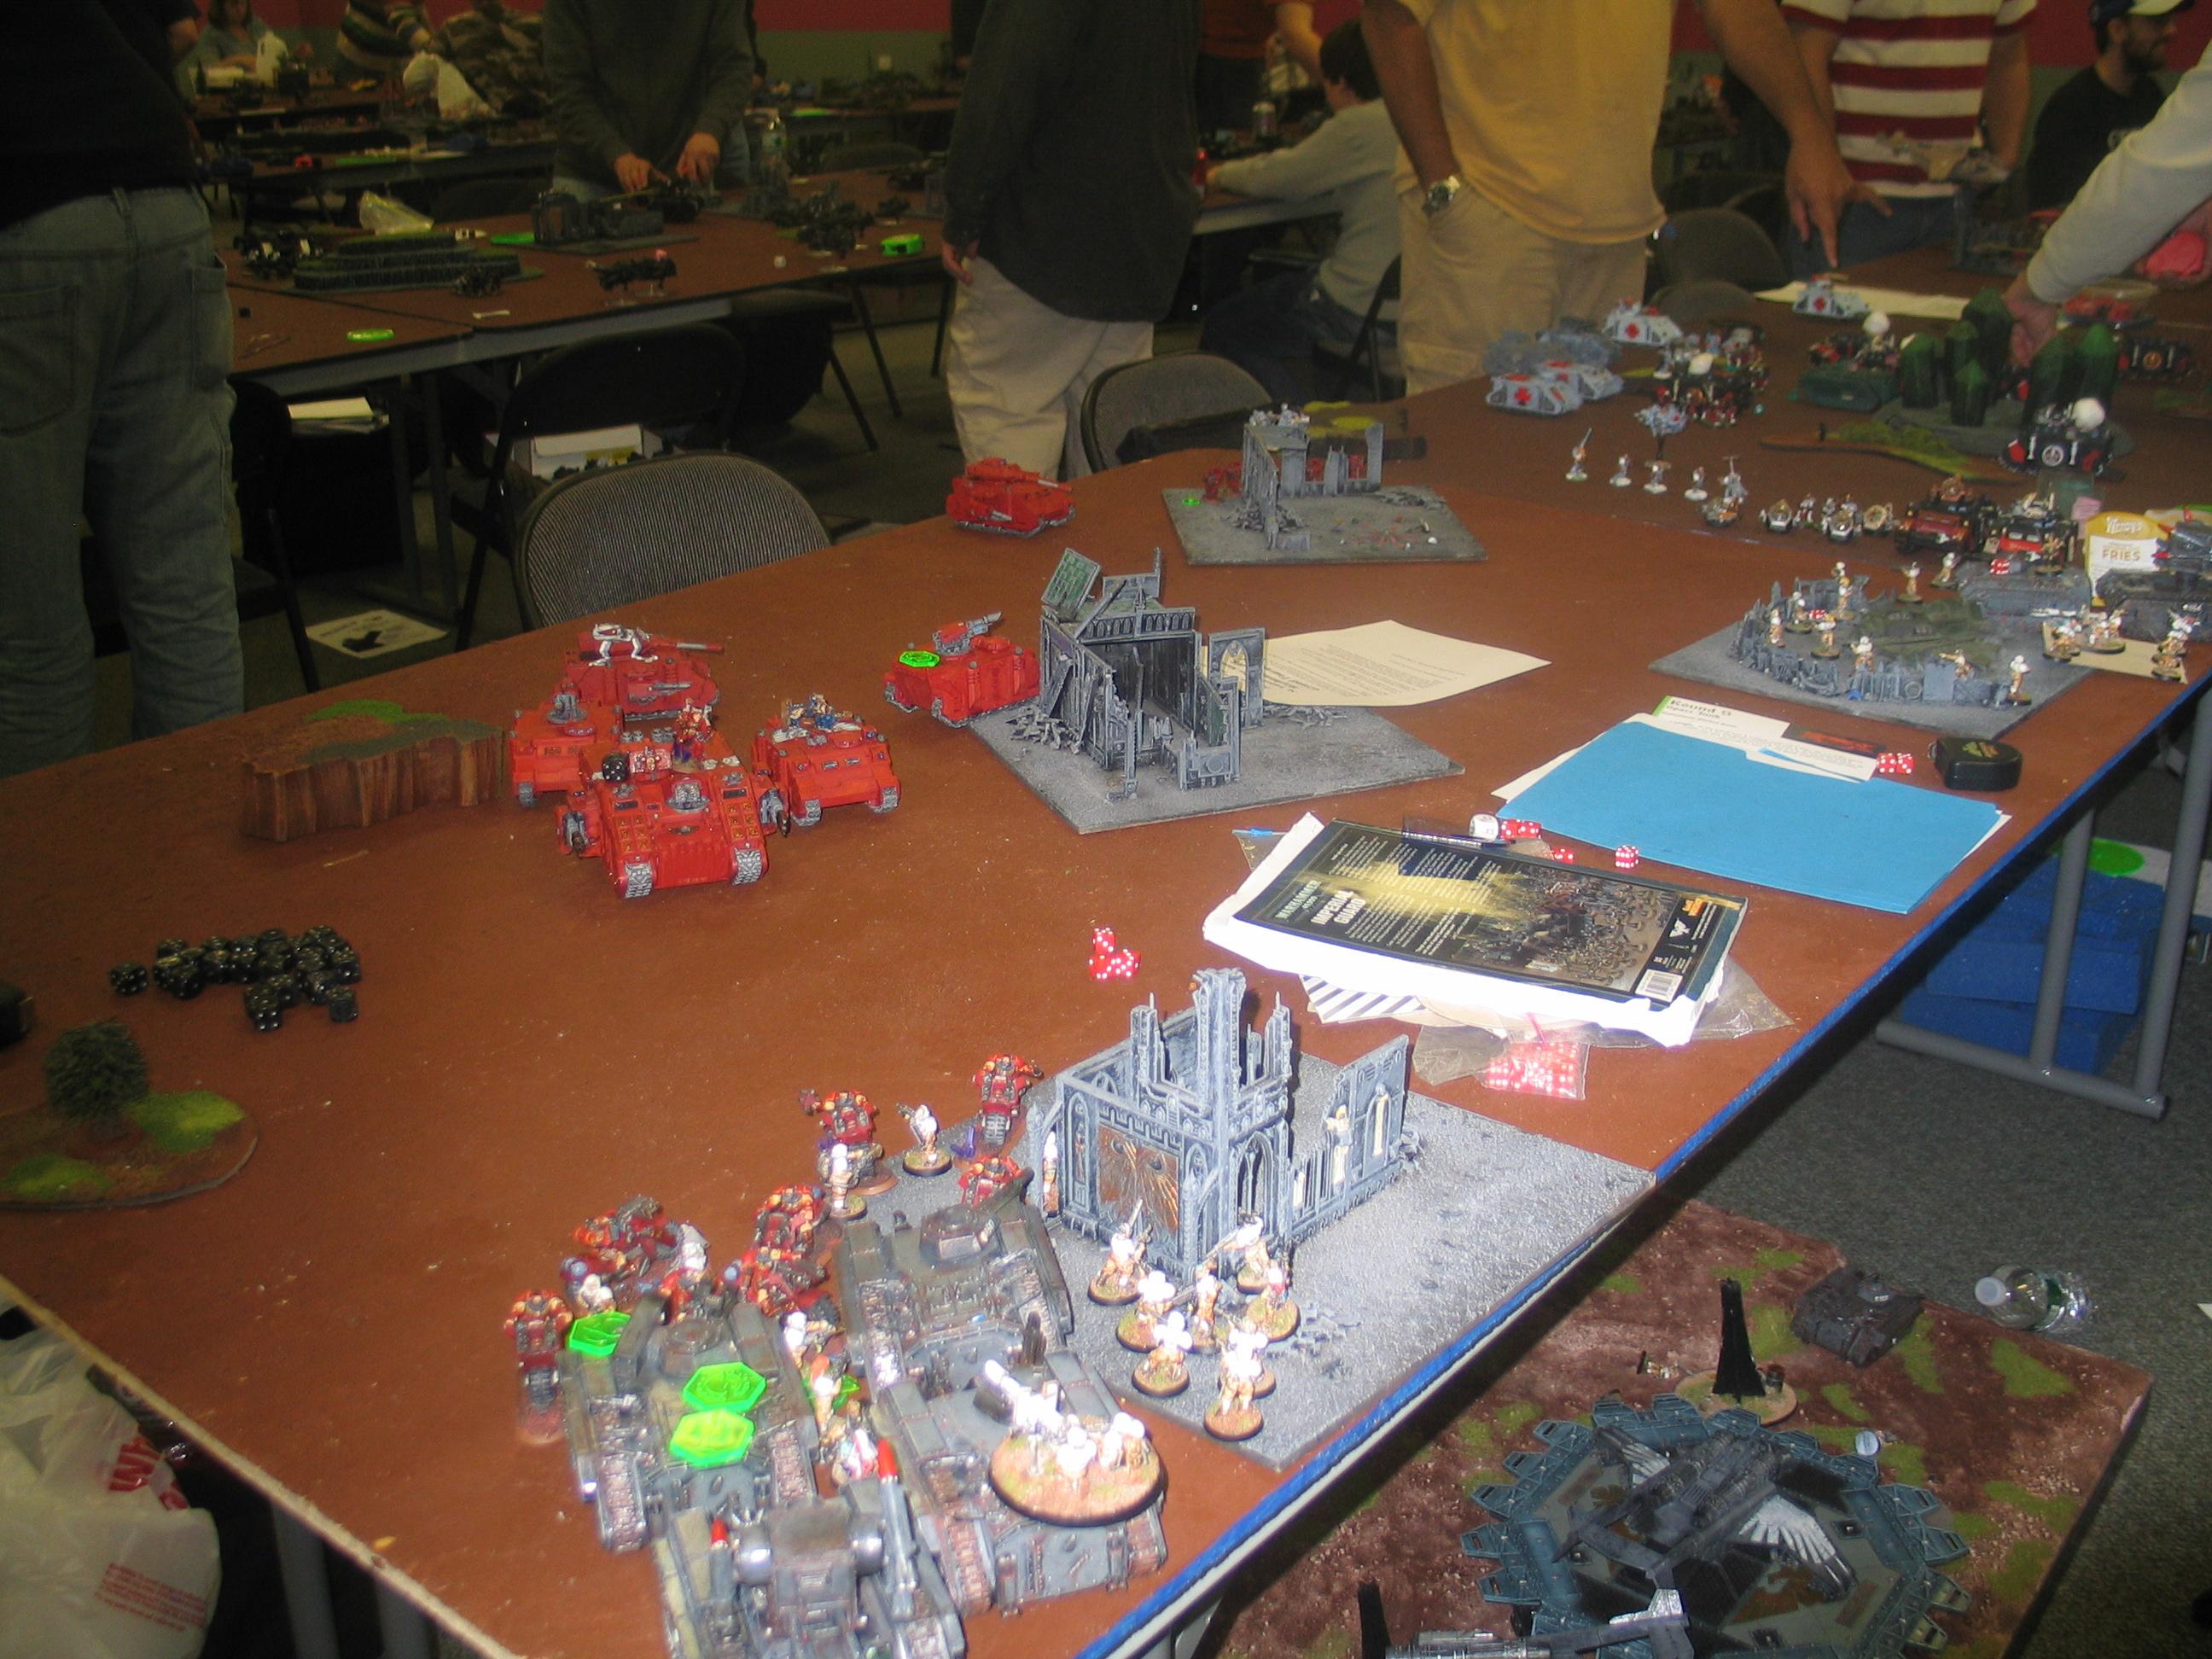 Conflict Gt 2011, Imperial Guard, Warhammer 40,000